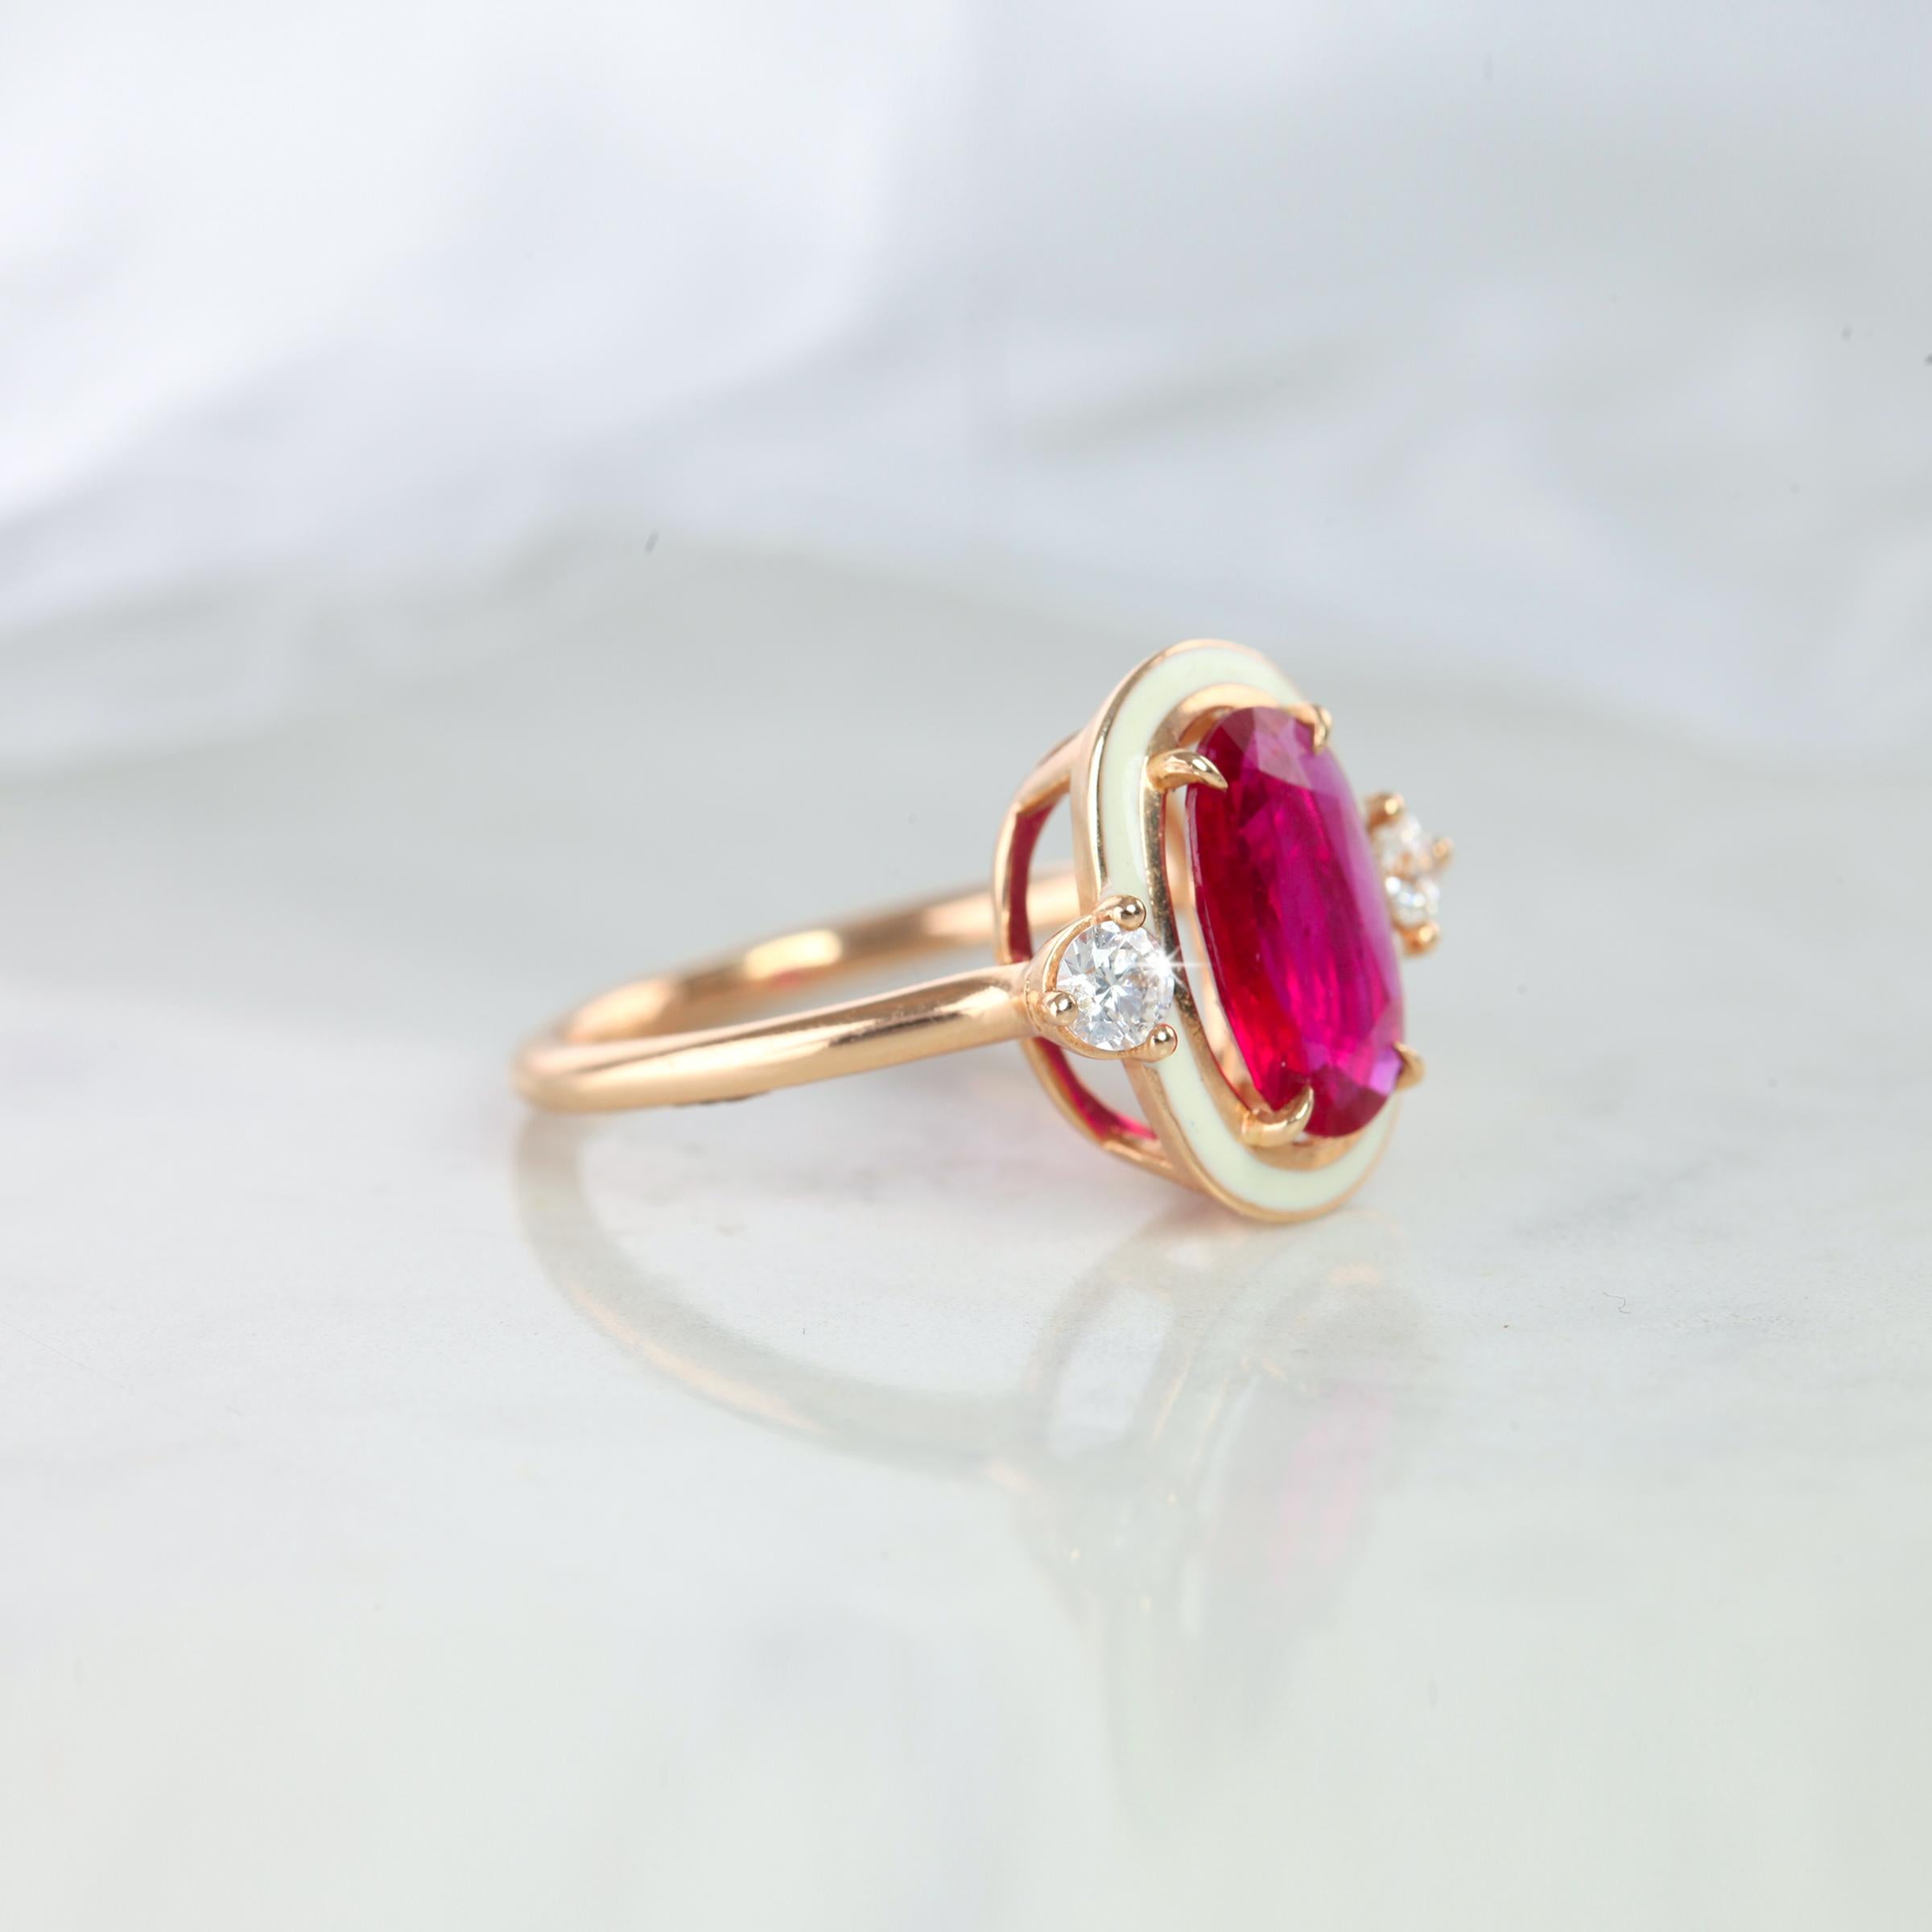 Diamond Ruby Enameled Art Deco Style Cocktail Ring

Gold metal: 14k Rose Gold
Ruby Shape: Oval Cut
Main Stone: 1.93 Carats
Side Stones: 0.30 Carats
Total Carat Weight: 2.22Carats
Color: Red
Clarity: VS1-2
Comments: Art Deco Enameled Ring
Cut: